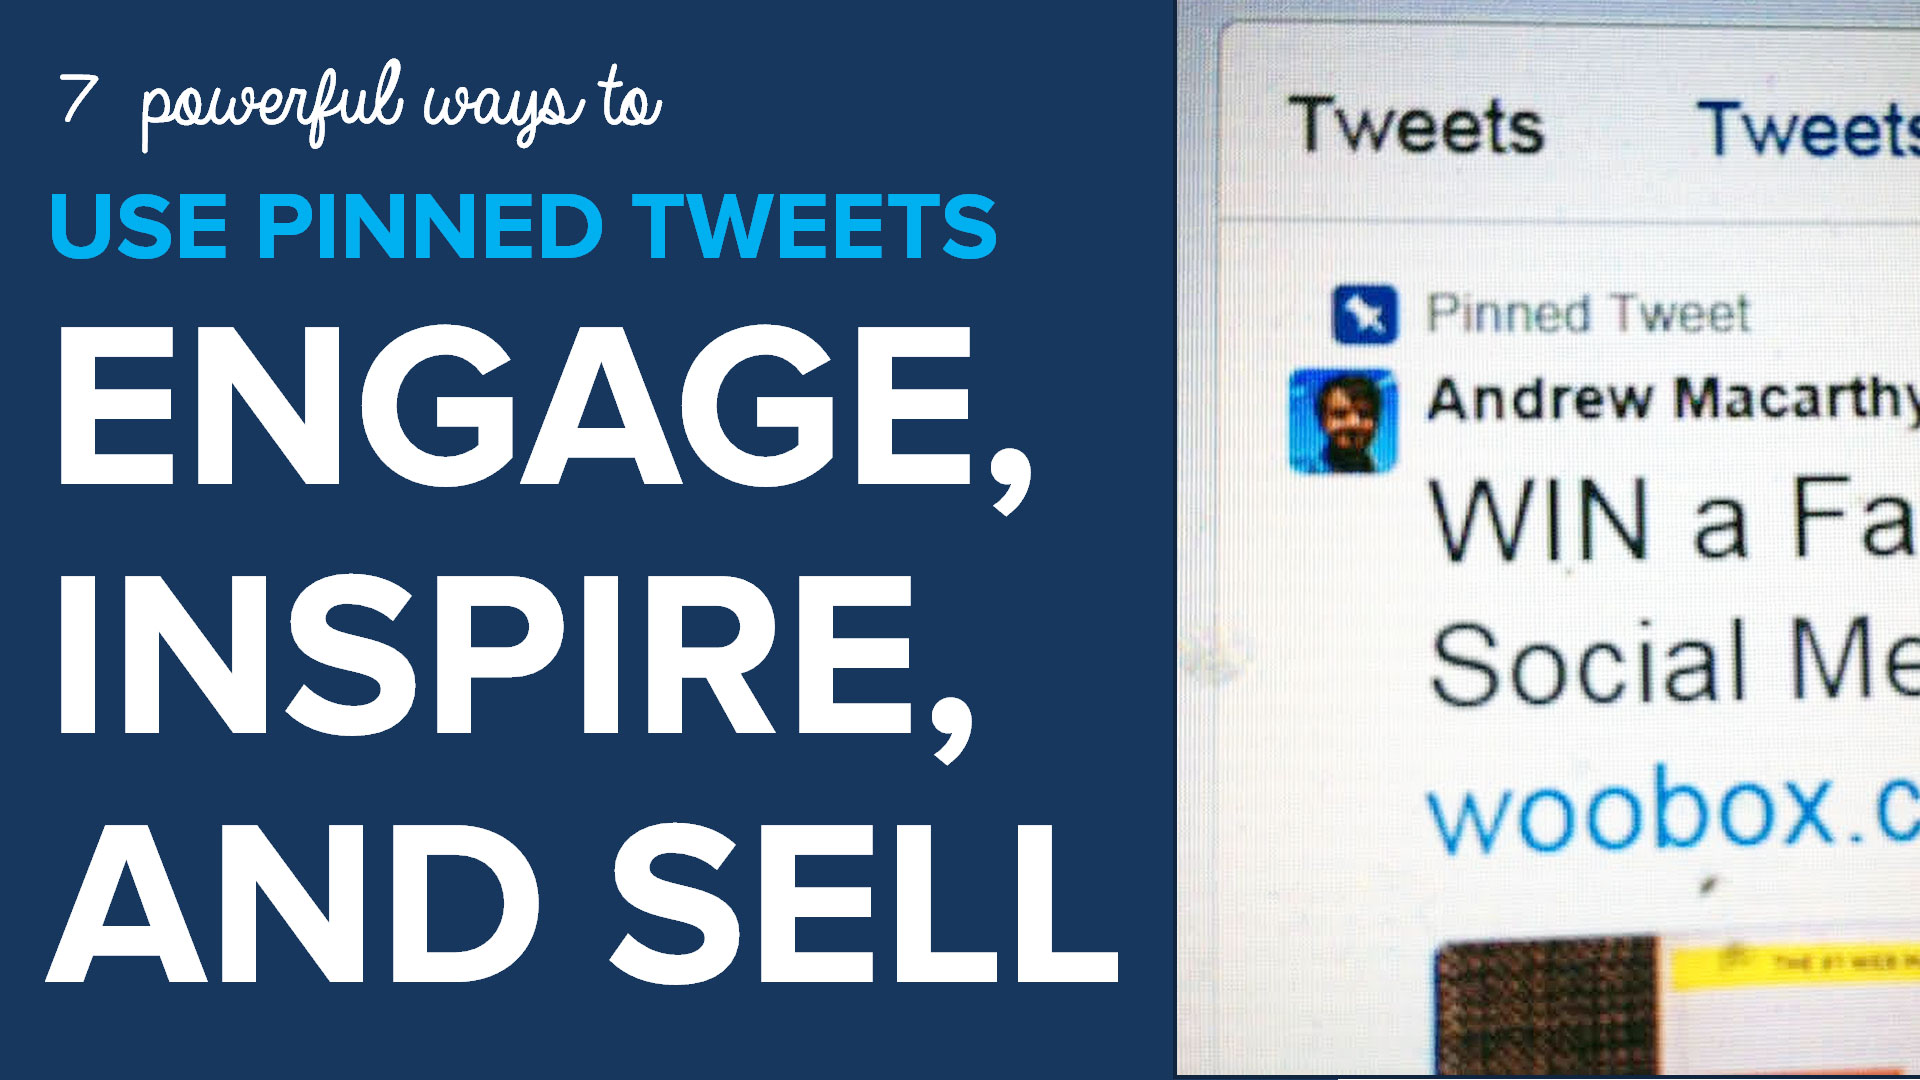 7 Powerful Ways To Use Pinned Tweets For Business To Engage Inspire